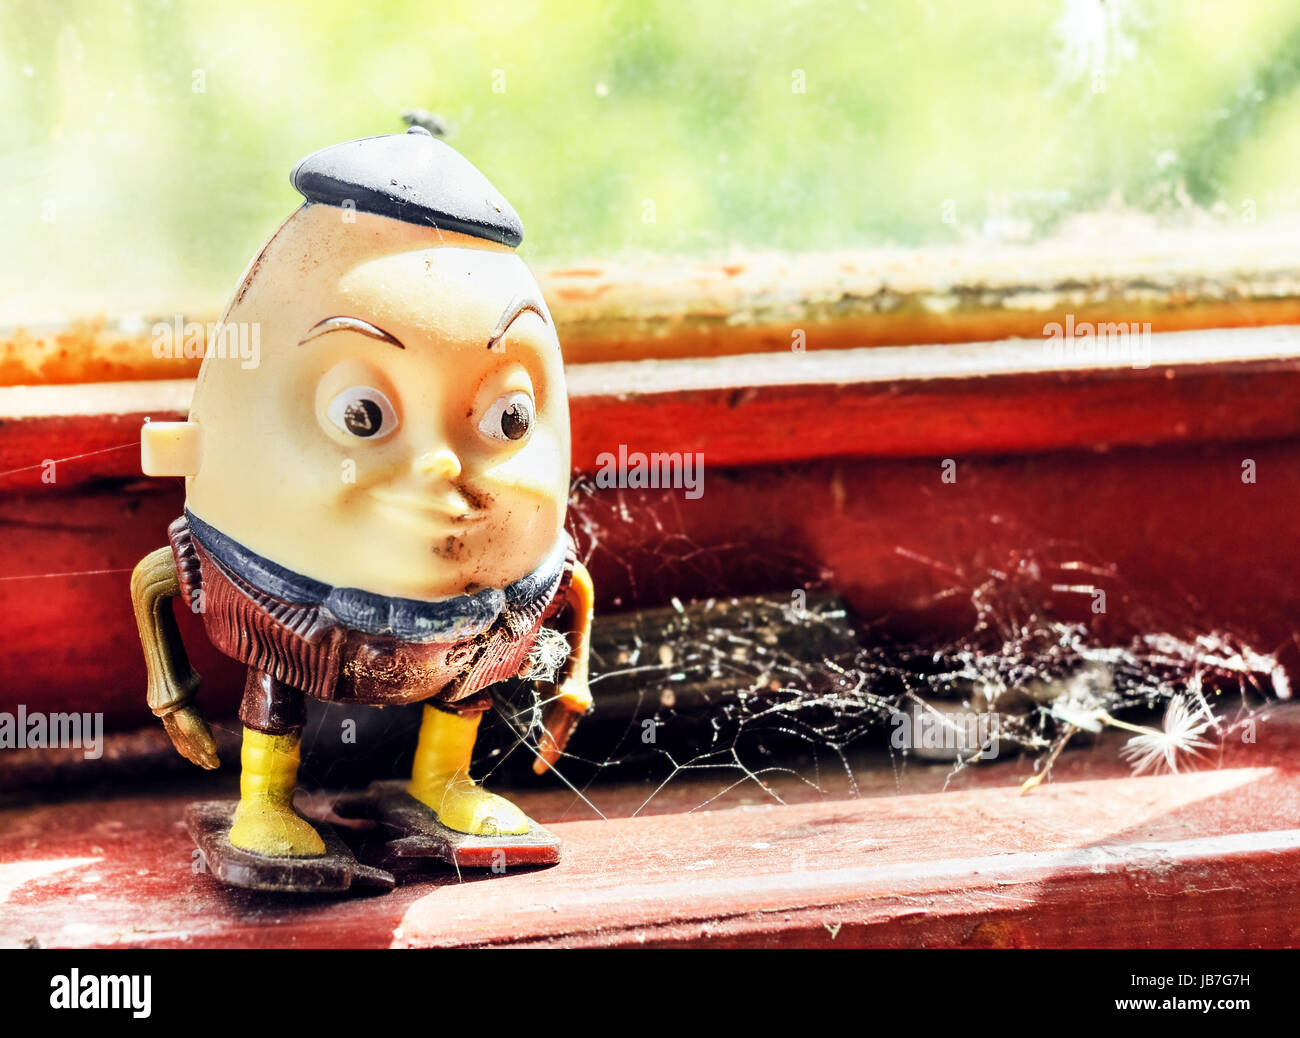 Humpty Dumpty toy old for editorial pictures Stock Photo